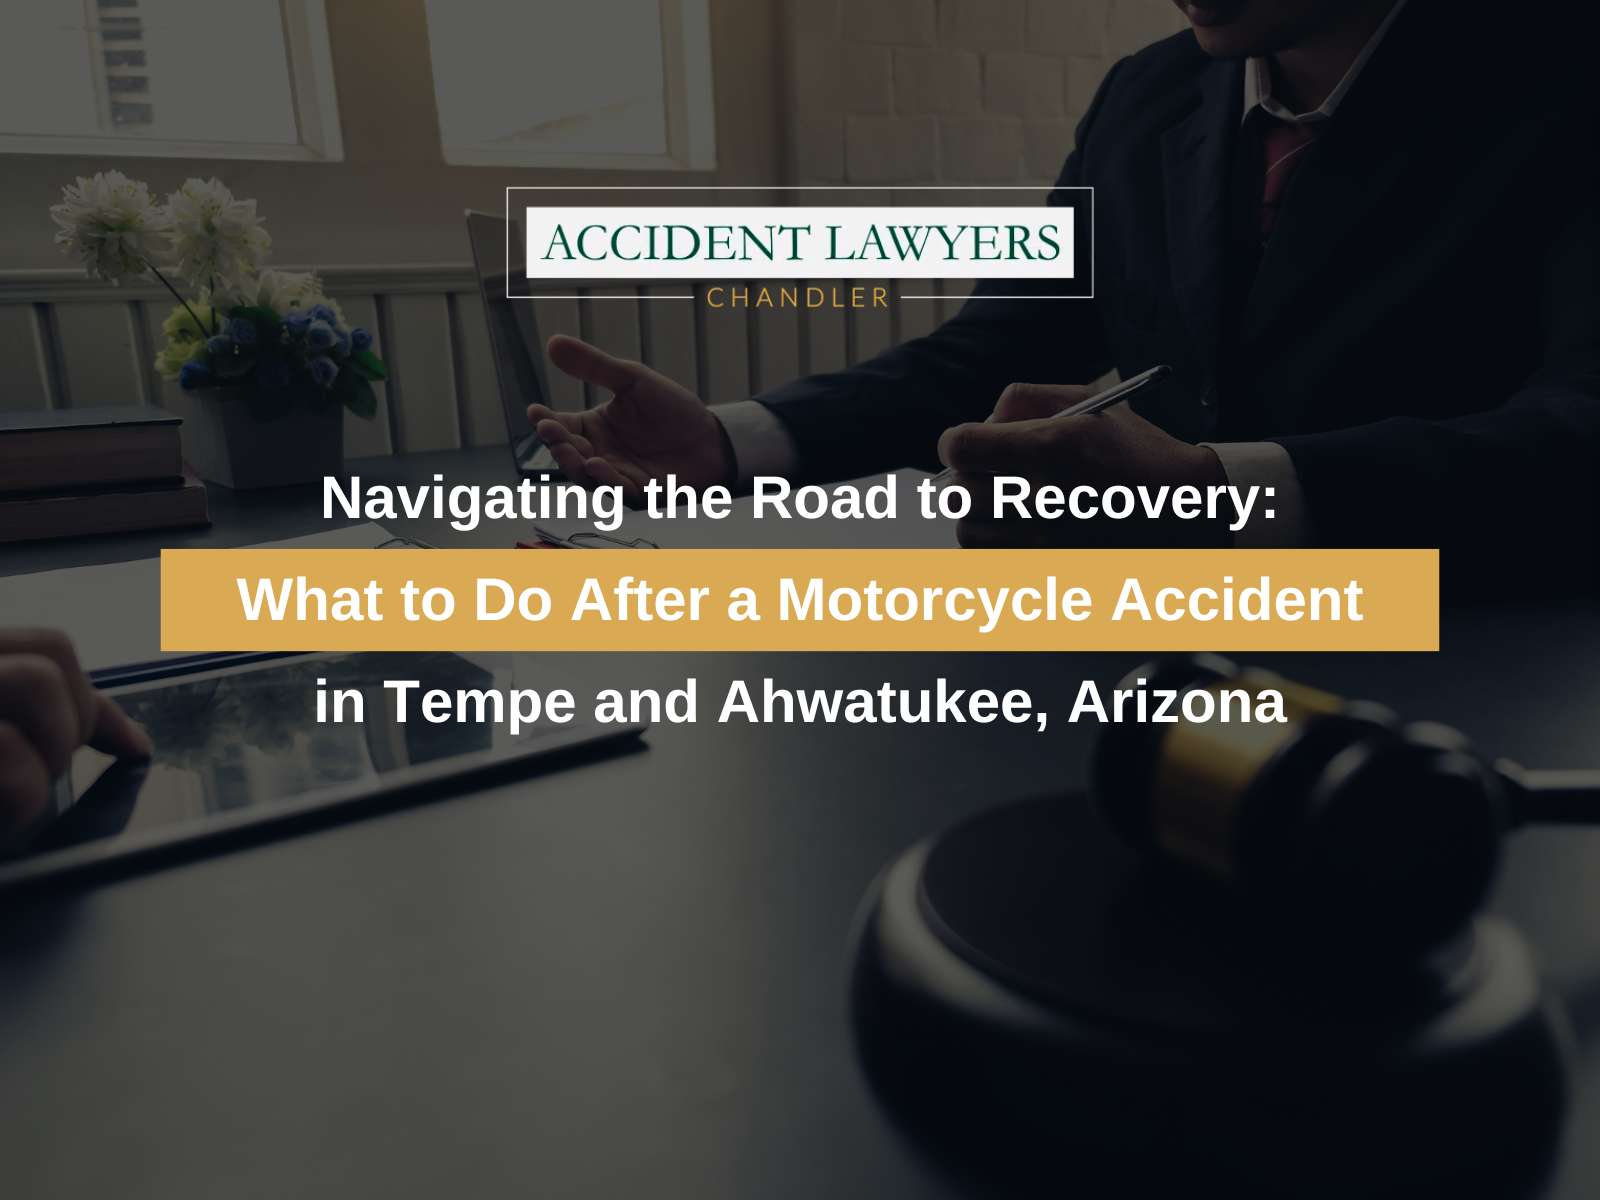 Navigating the Road to Recovery: What to Do After a Motorcycle Accident in Tempe and Ahwatukee, Arizona